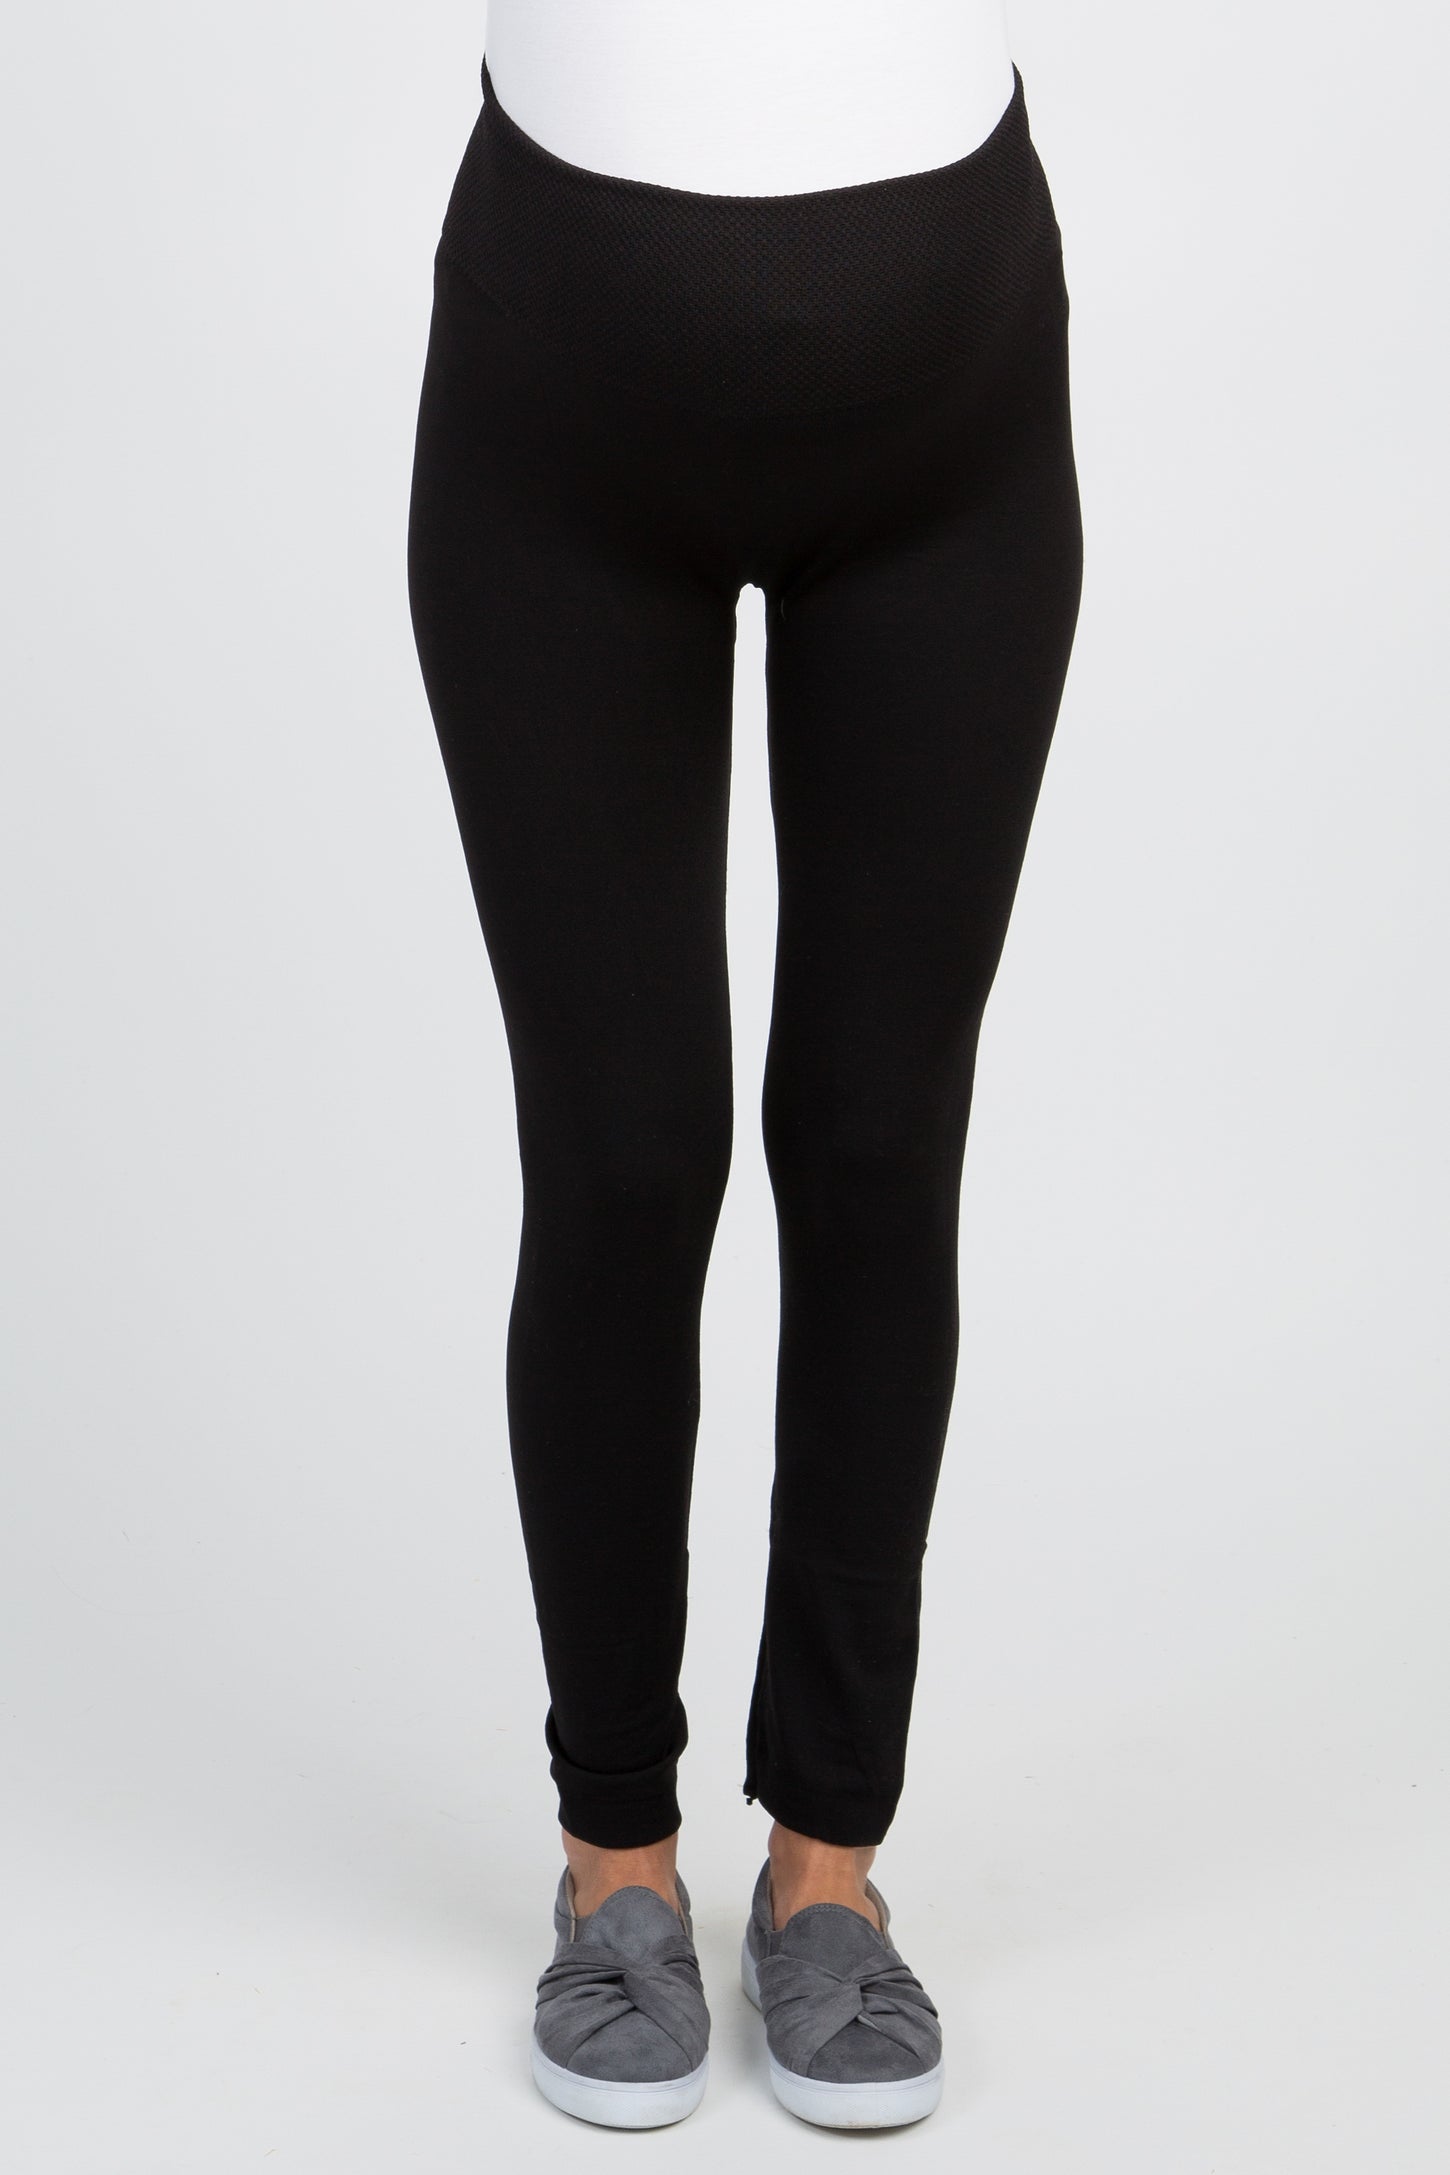 Over The Belly Maternity Fleece Lined Leggings - Isabel Maternity